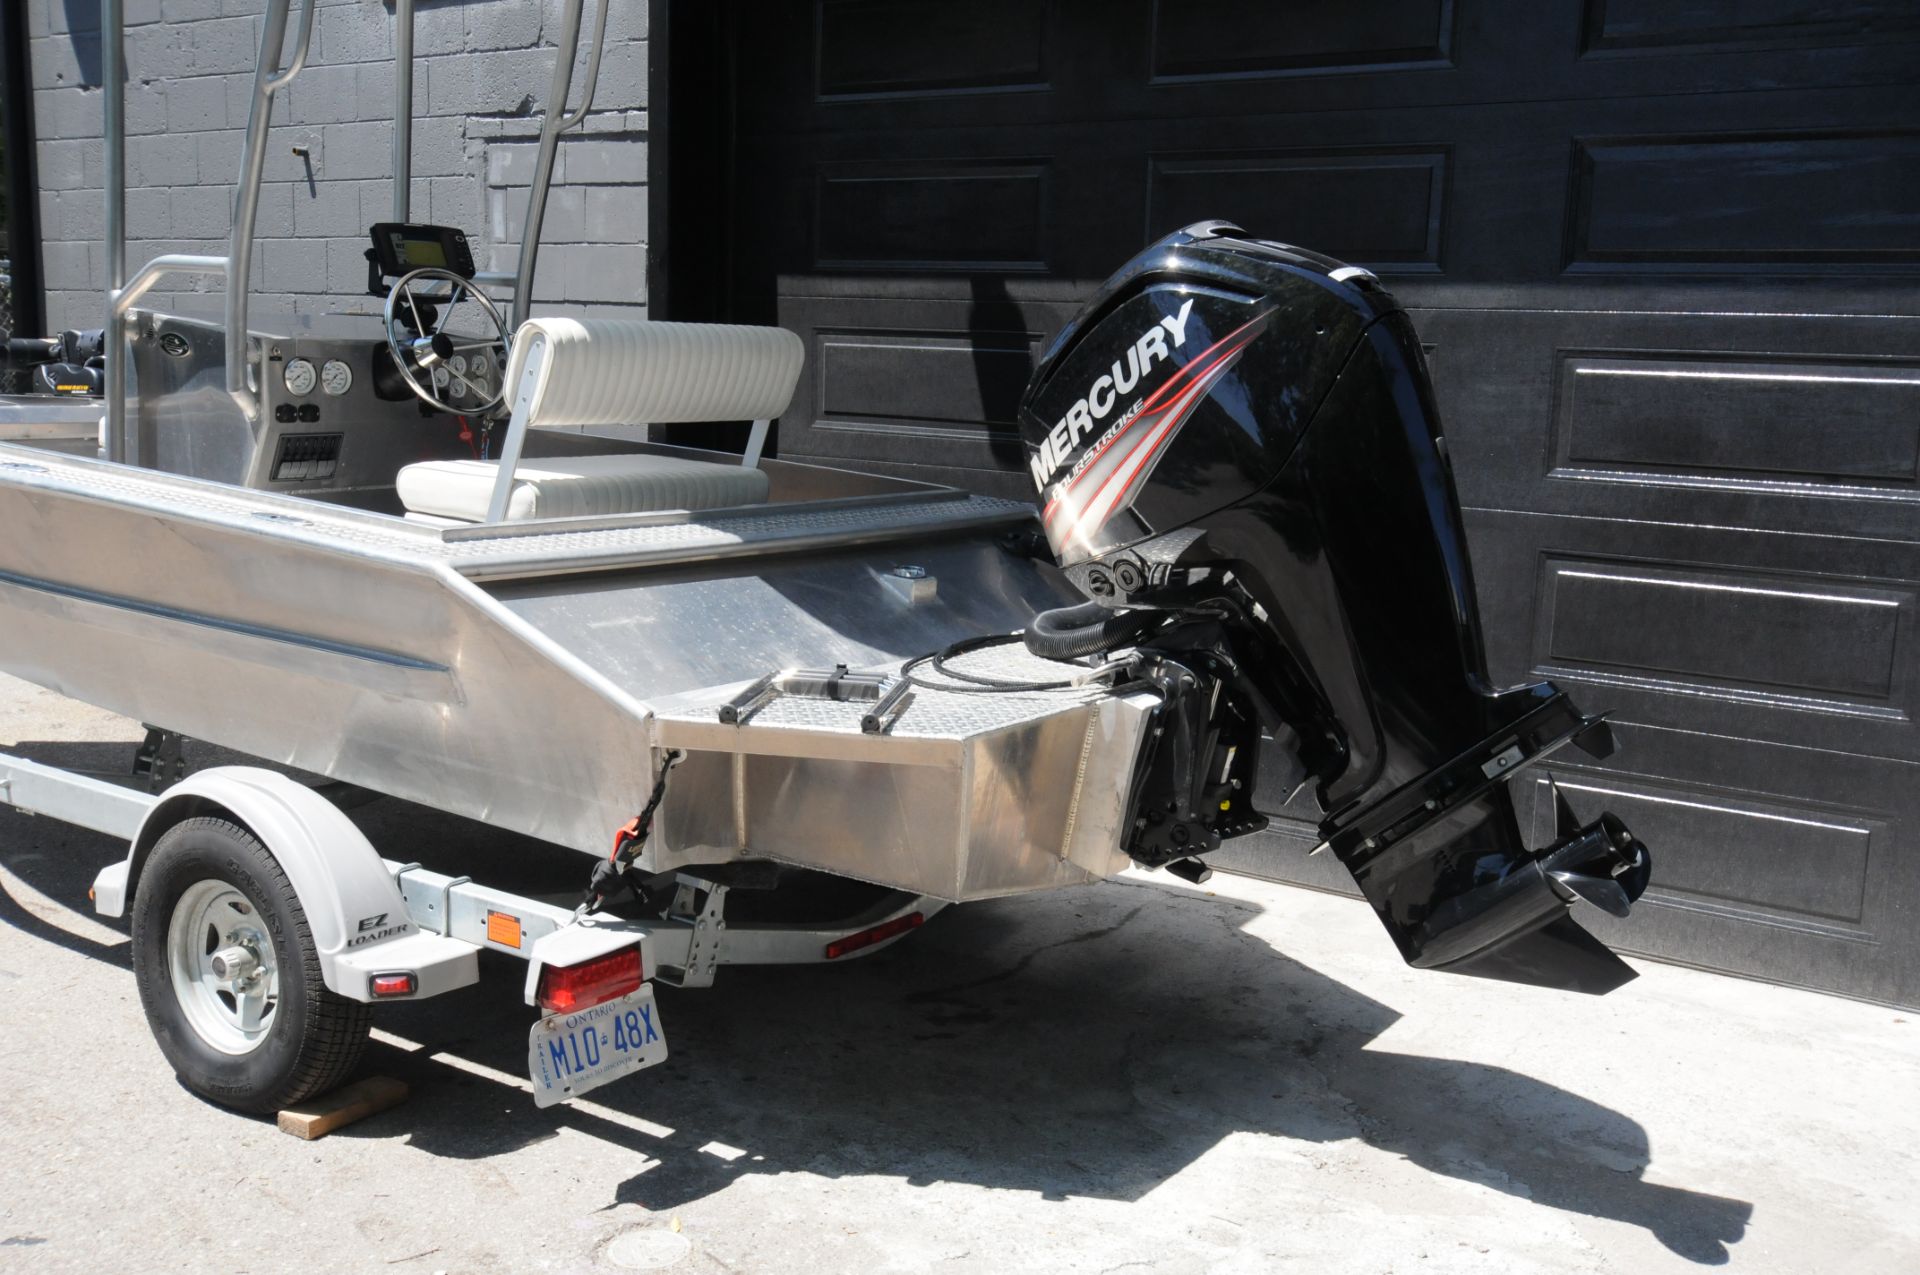 BAYVIEW BOATS (2013) PROFISHER 16 CENTER CONSOLE ALUMINUM FISHING BOAT ALL WELDED CONSTRUCTION - Image 3 of 21